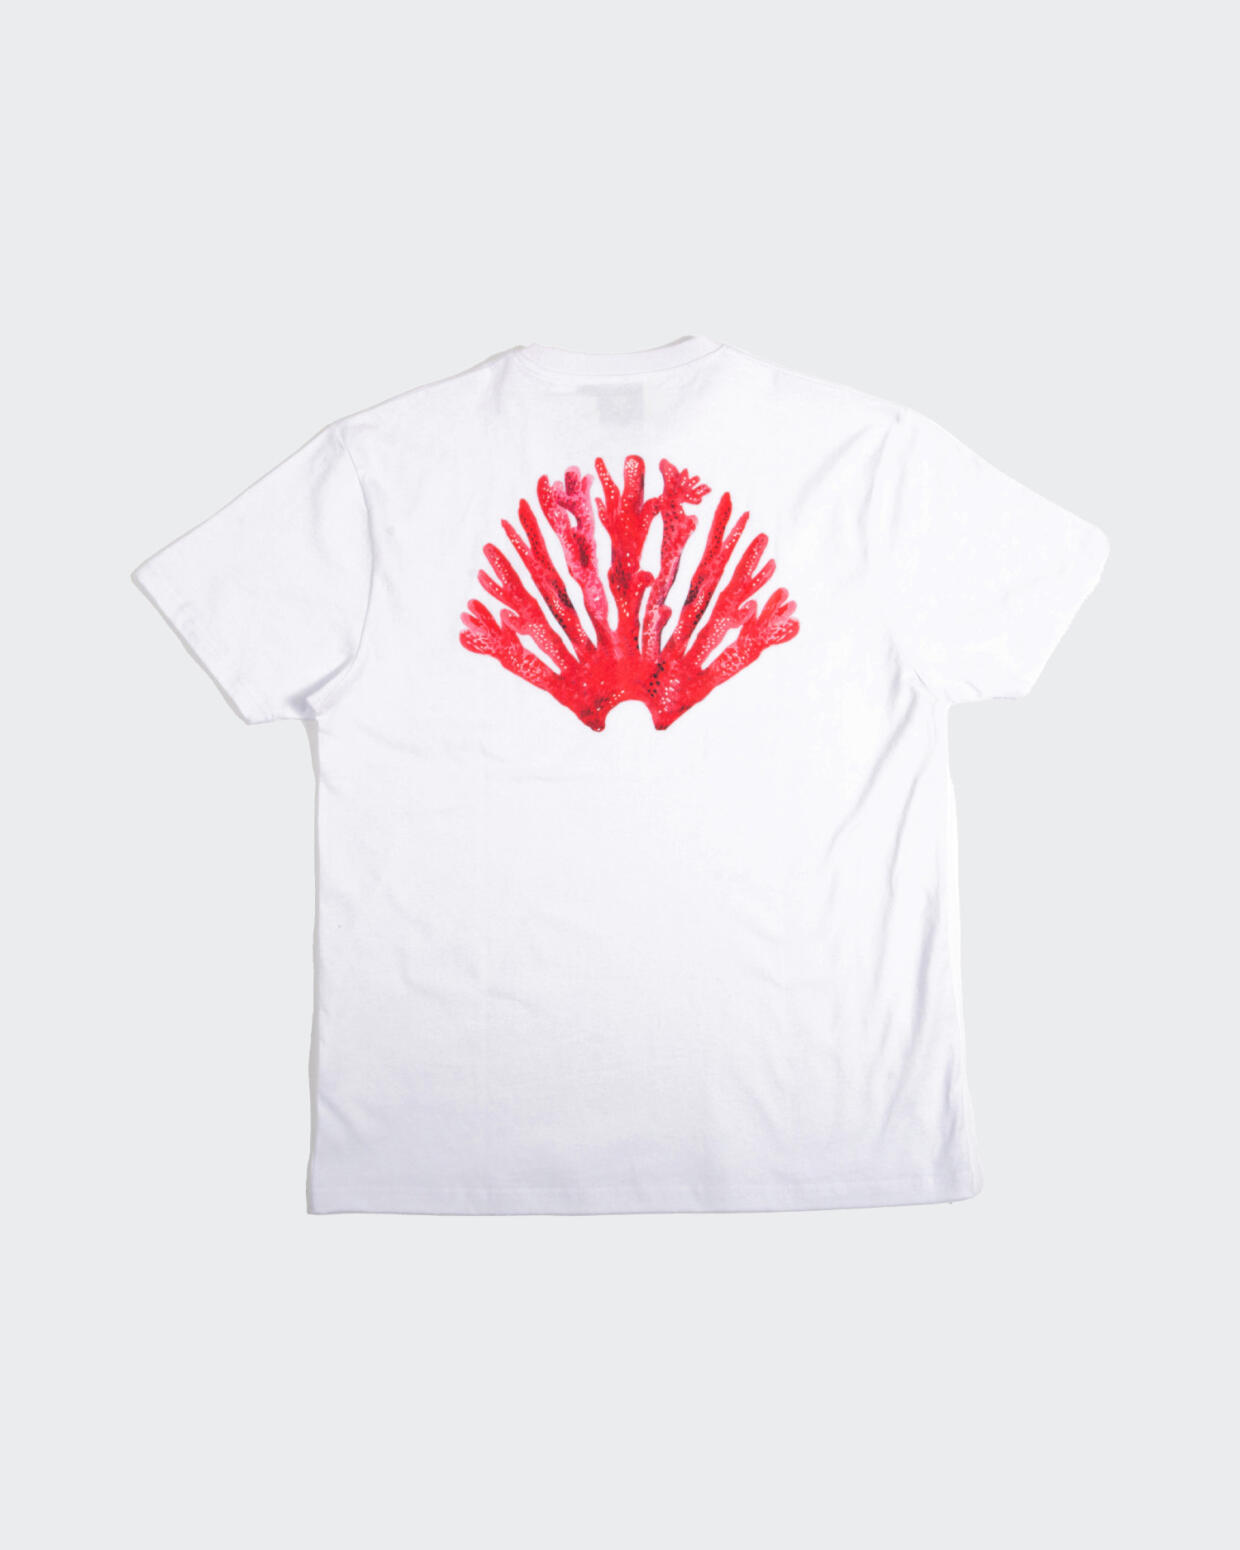 New Amsterdam Surf Association Coral Tee